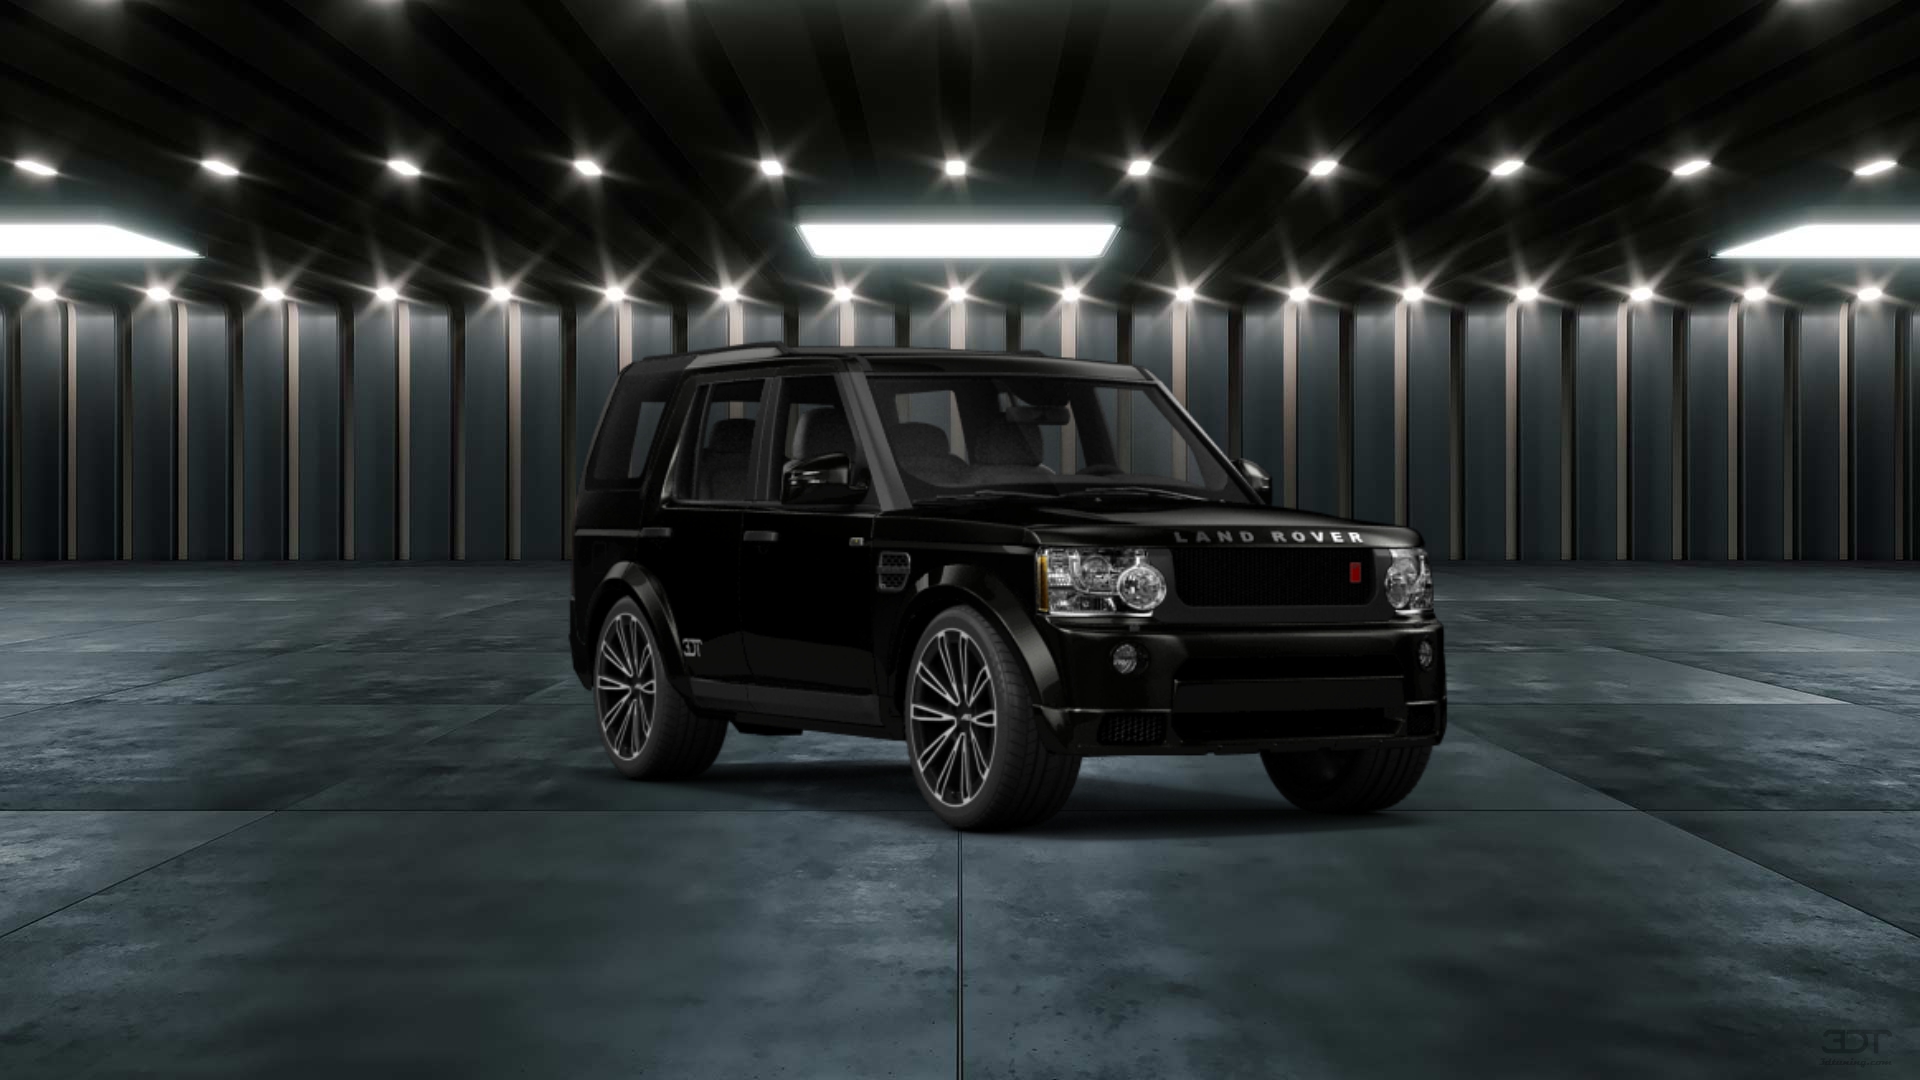 Range Rover Discovery 4 SUV 2012 tuning